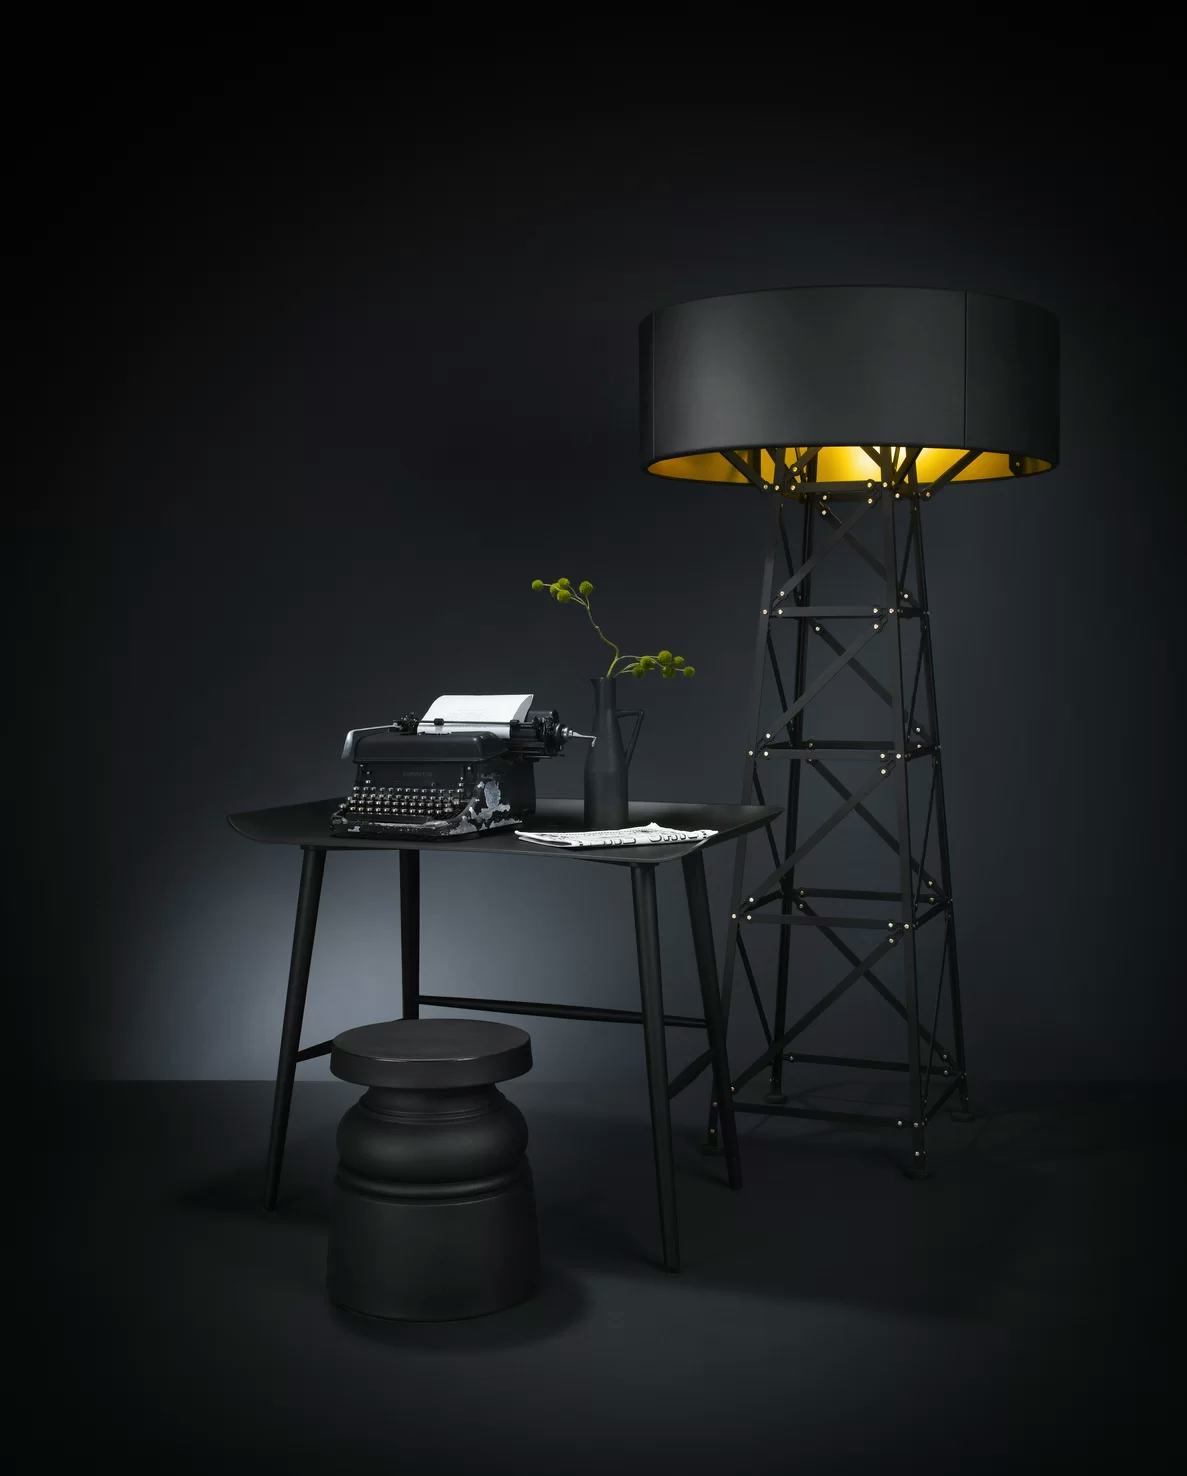 Poetic composition Construction Lamp, Woood desk and Container New Antiques Stool